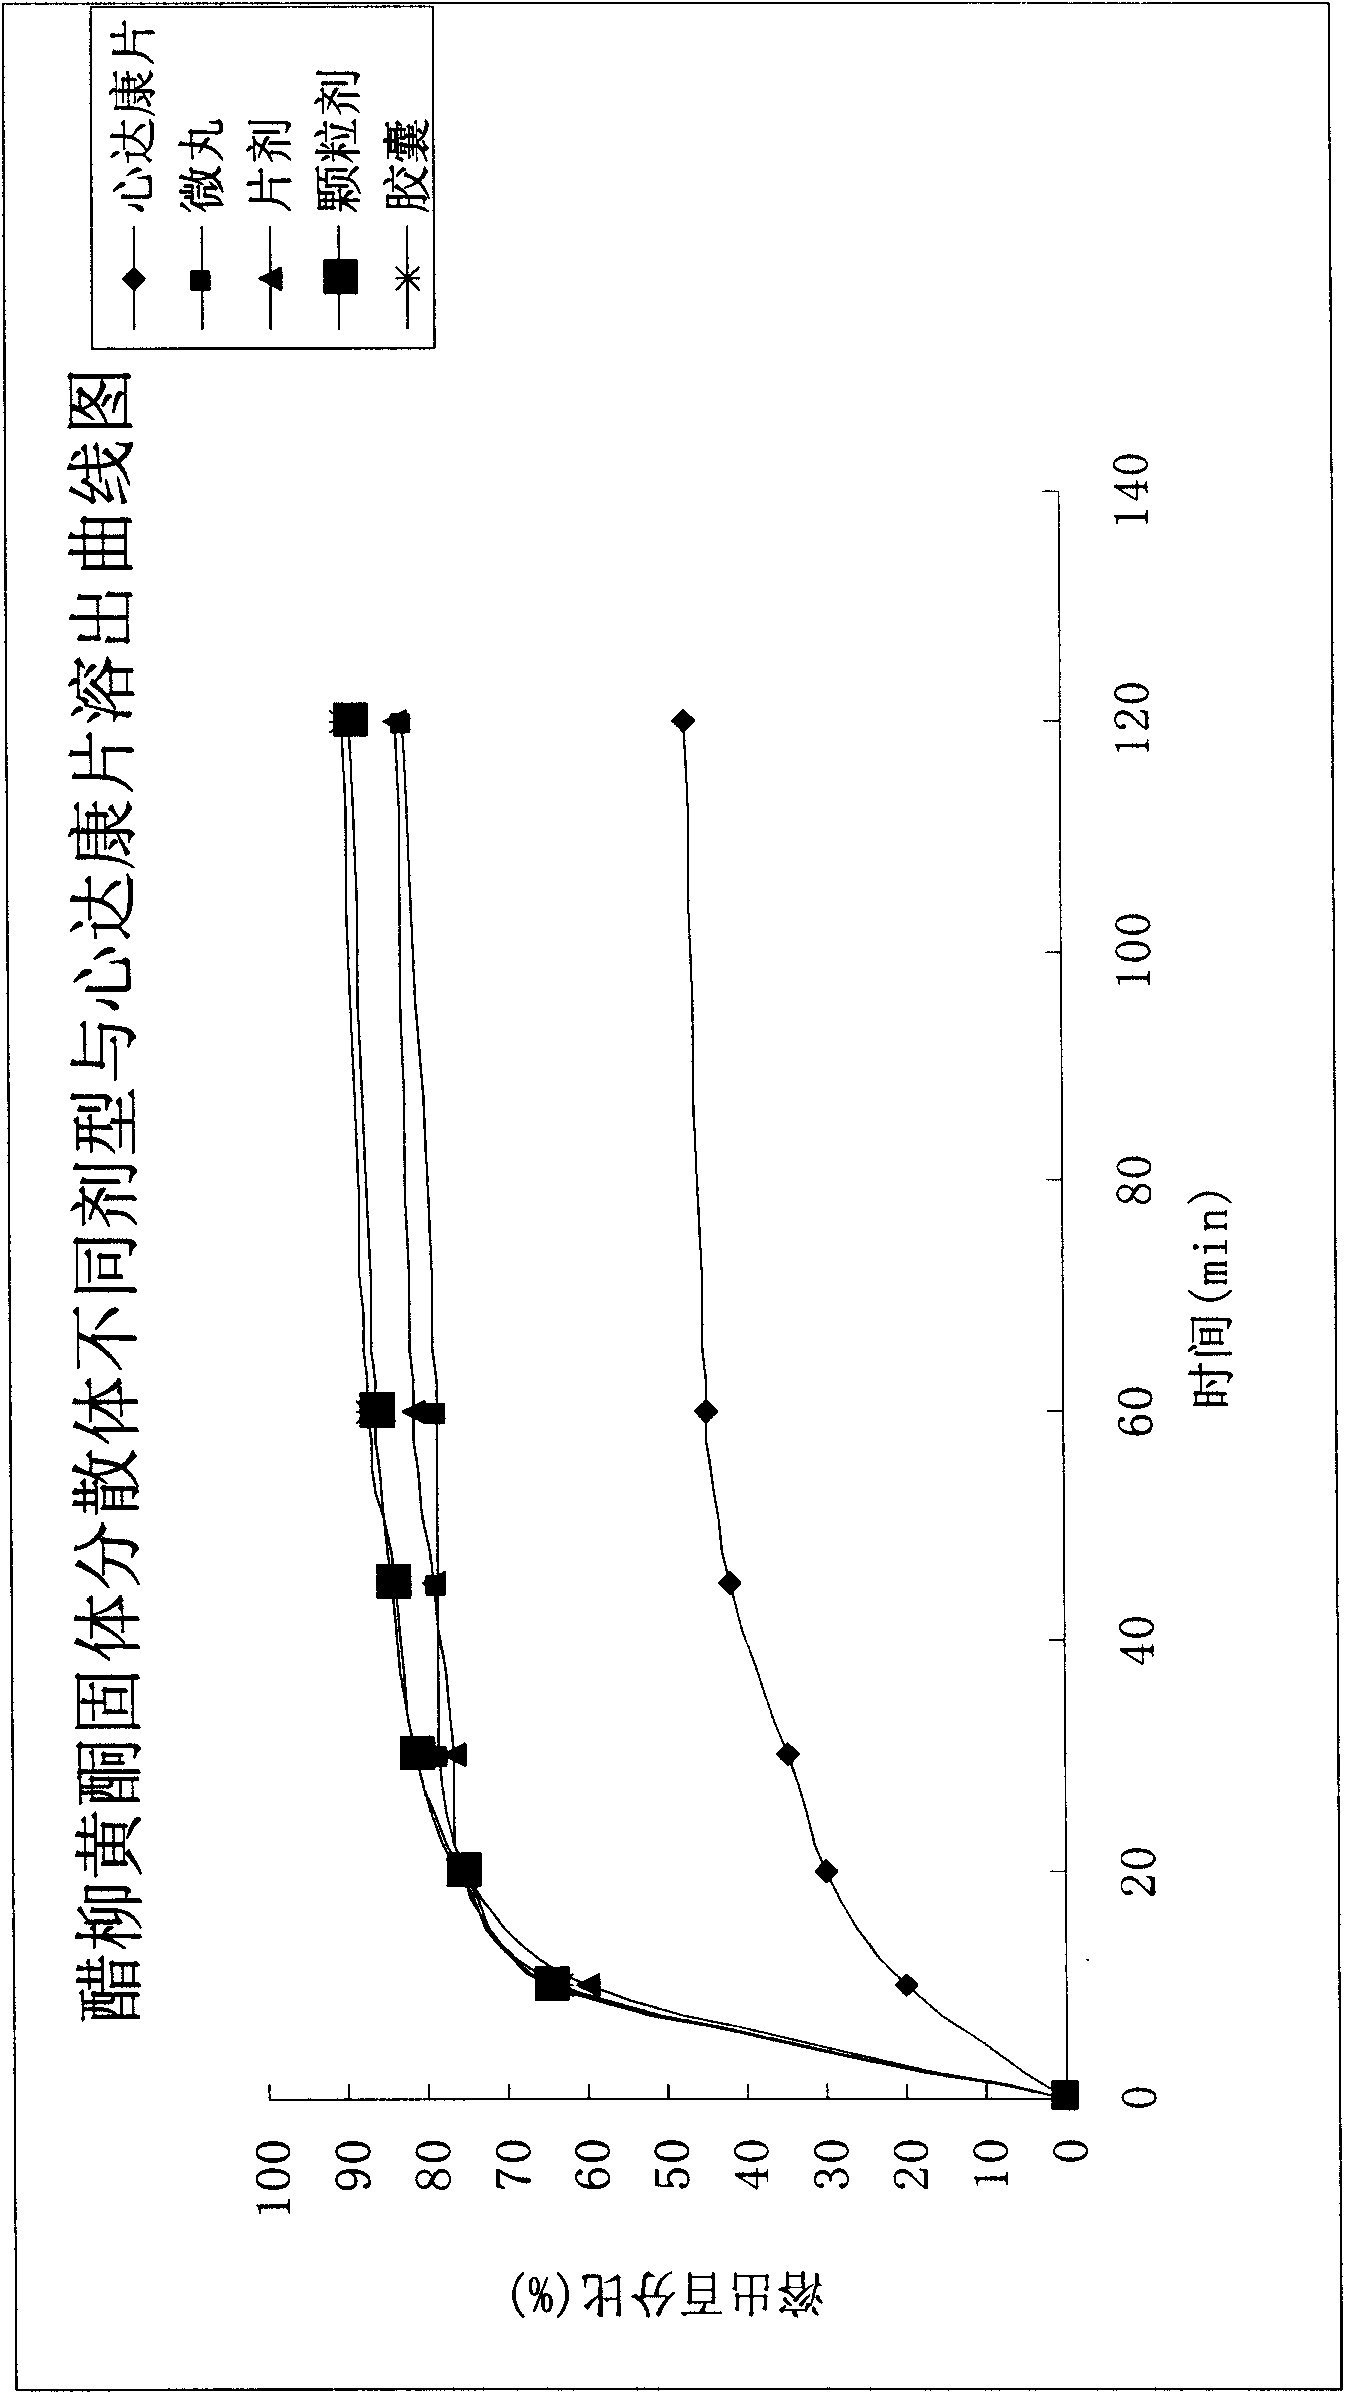 Flavone acetylsalicylate solid dispersion and preparation method thereof